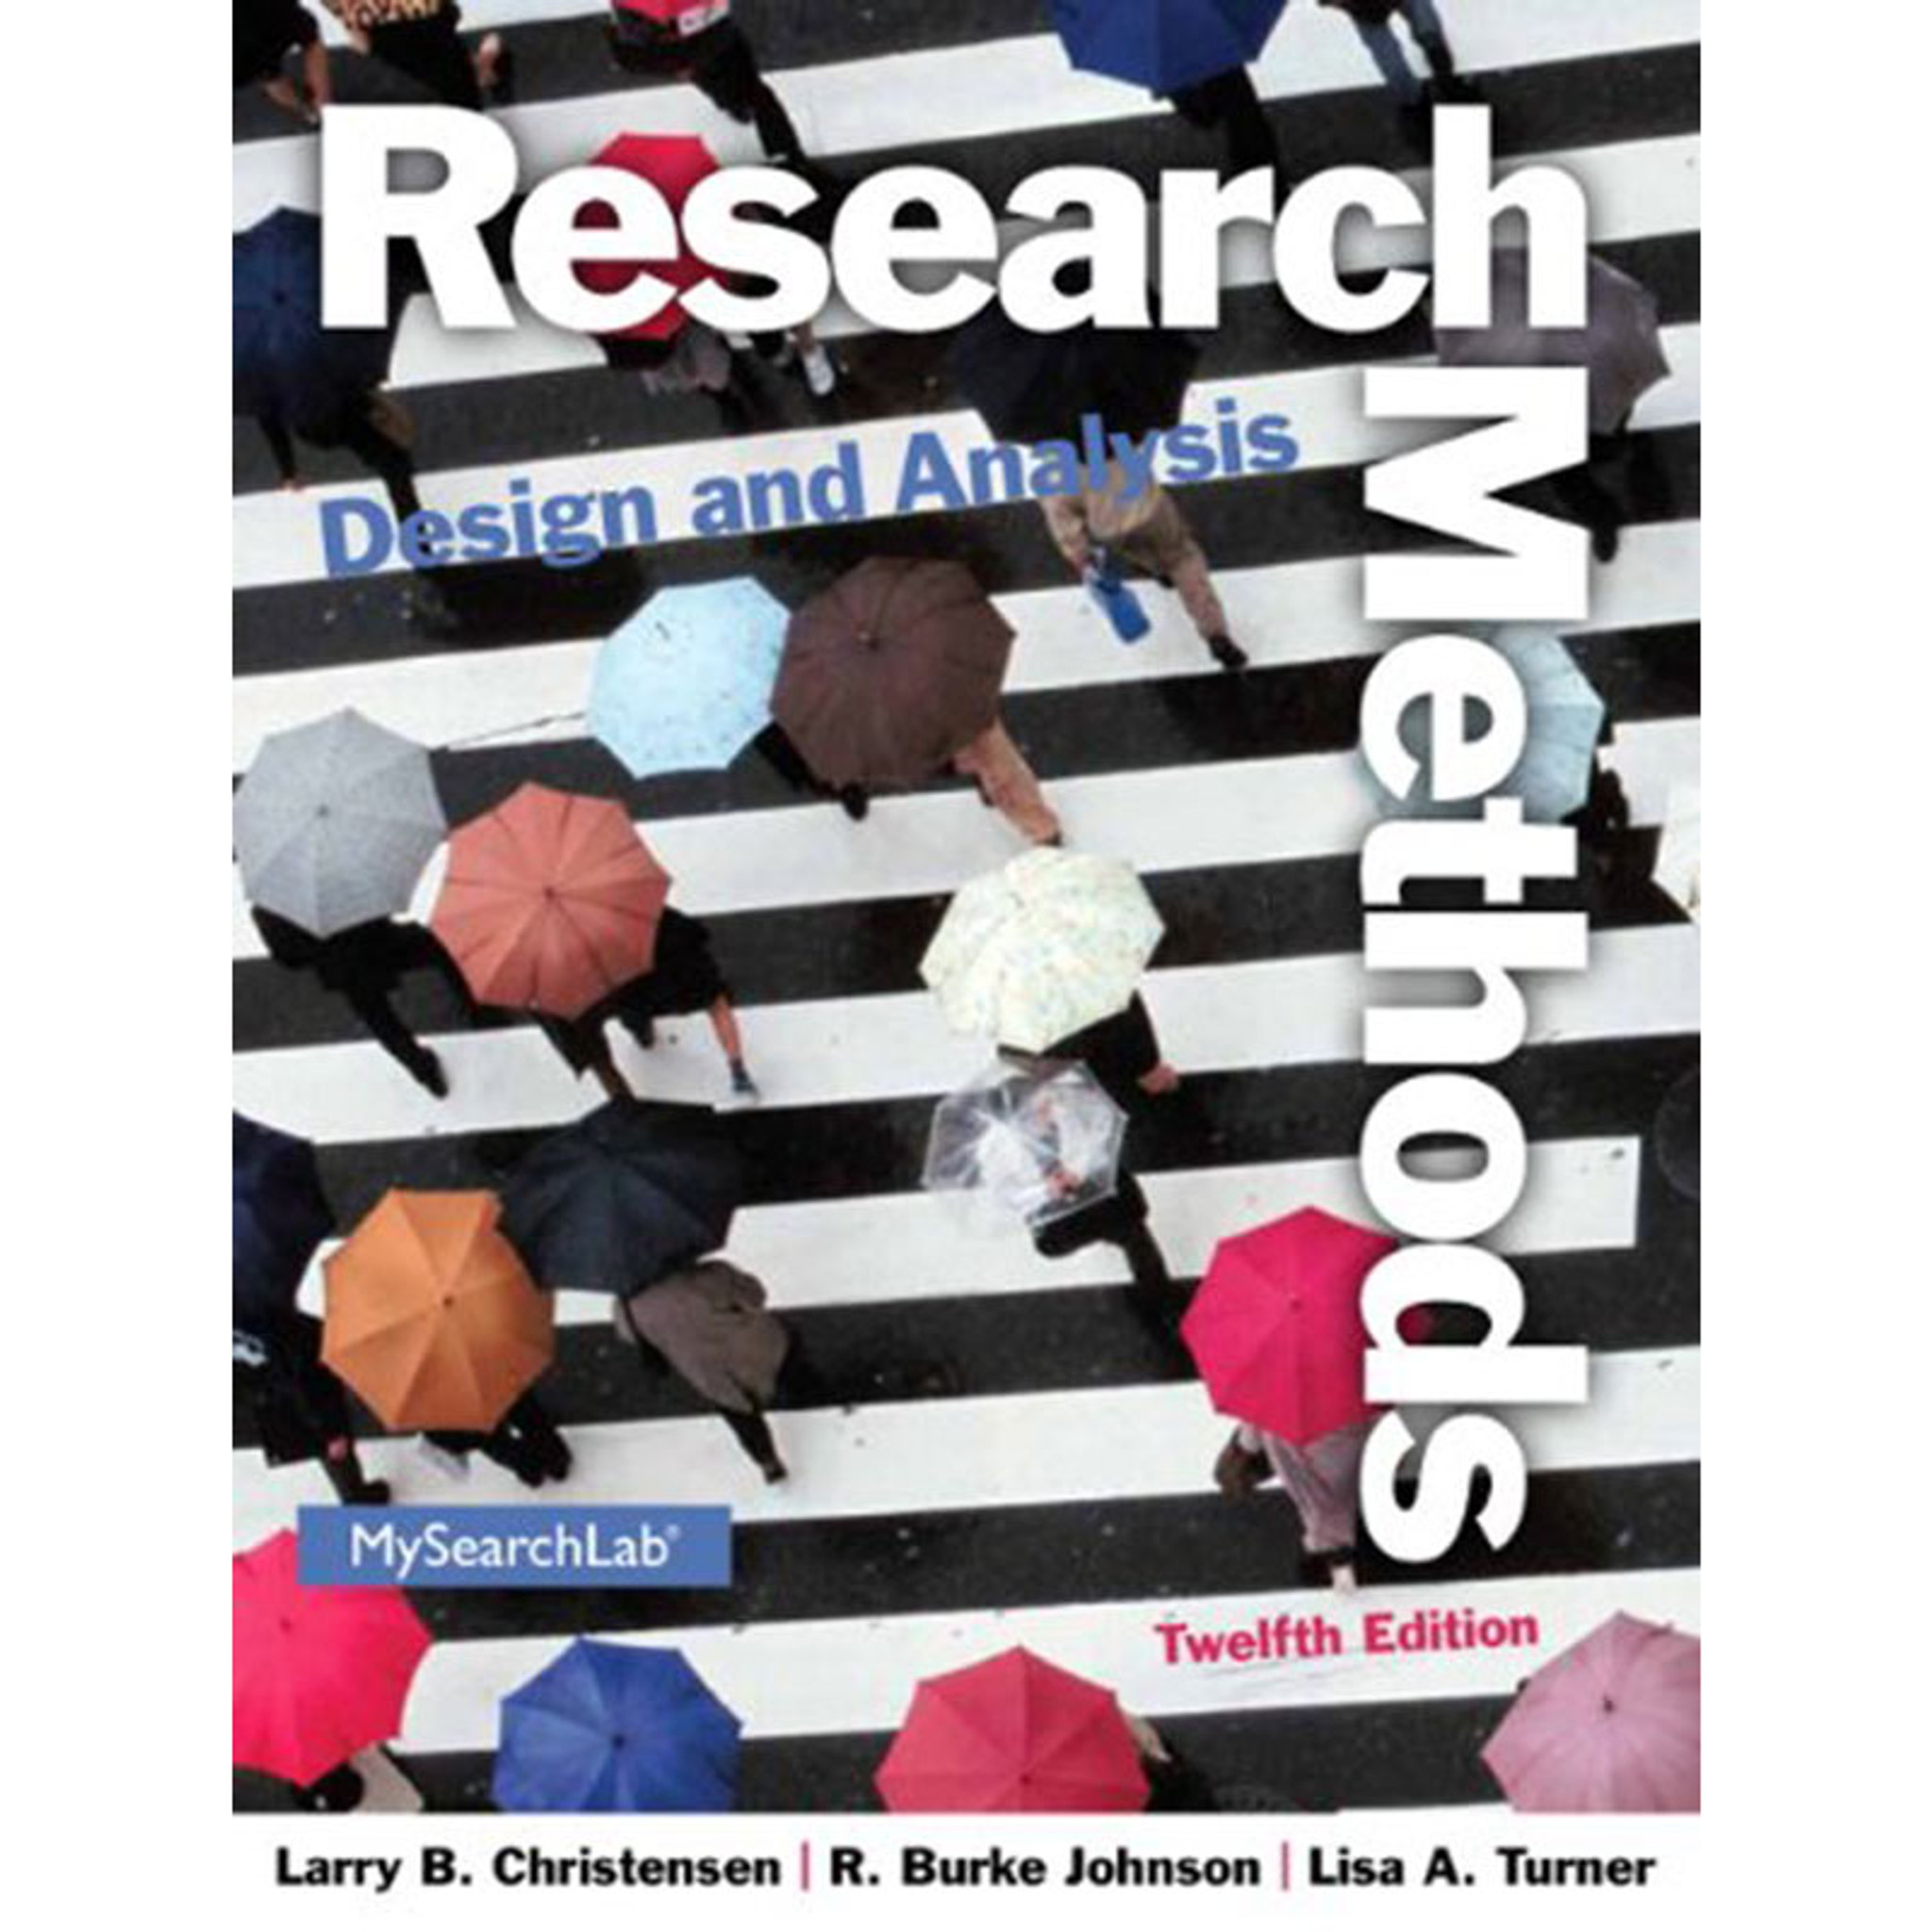 research methods design and analysis global edition 12th edition